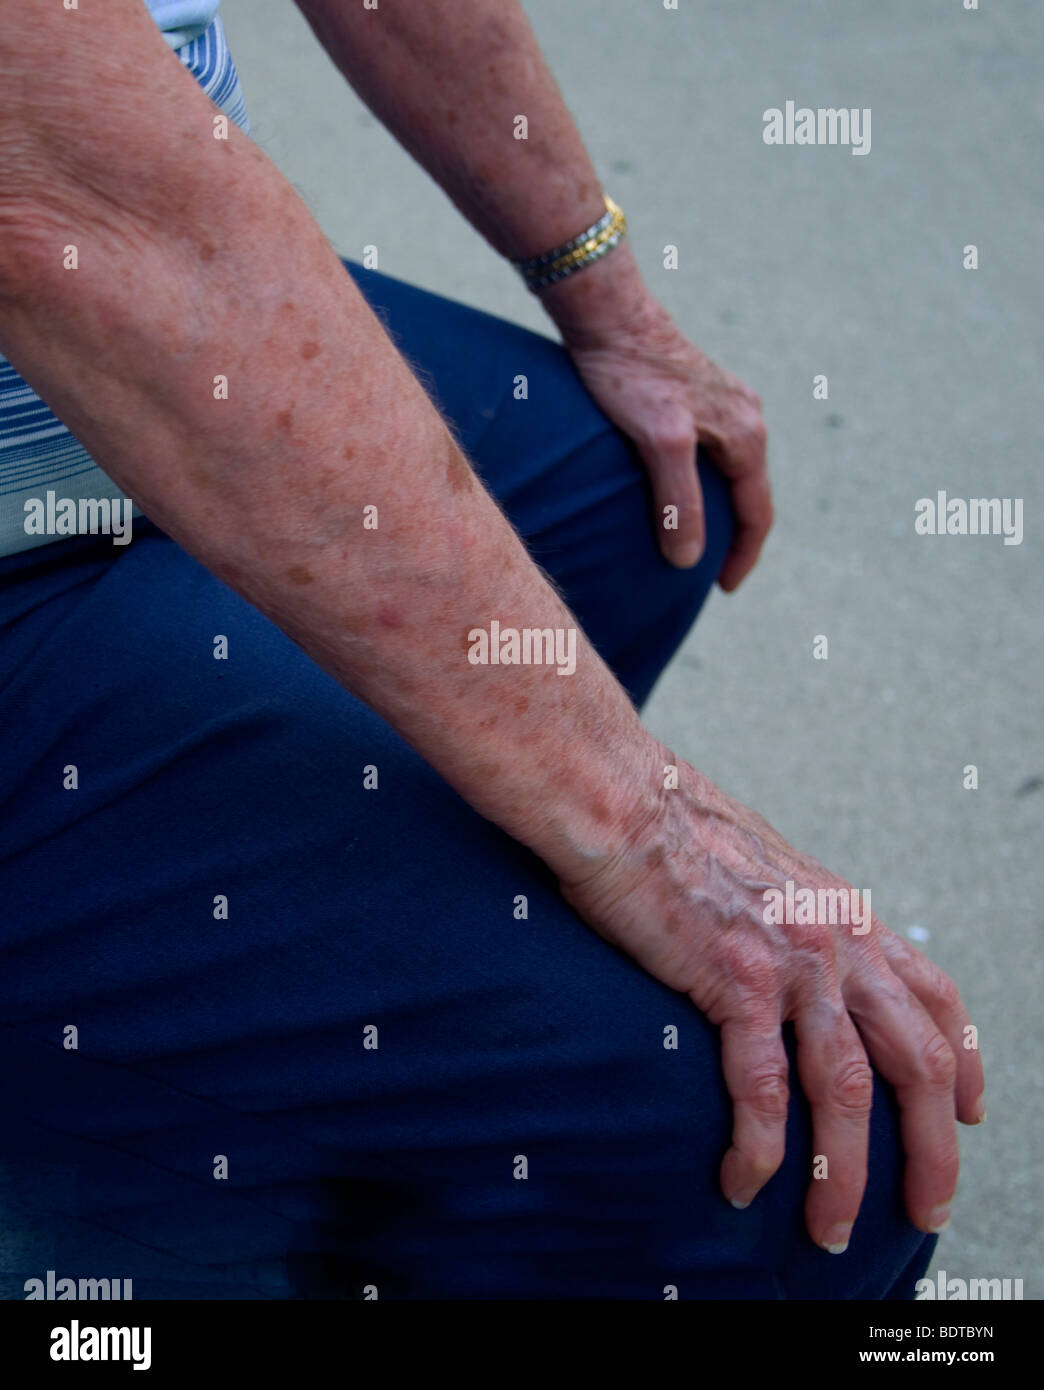 Older woman with liver spots on arms and hands. Stock Photo